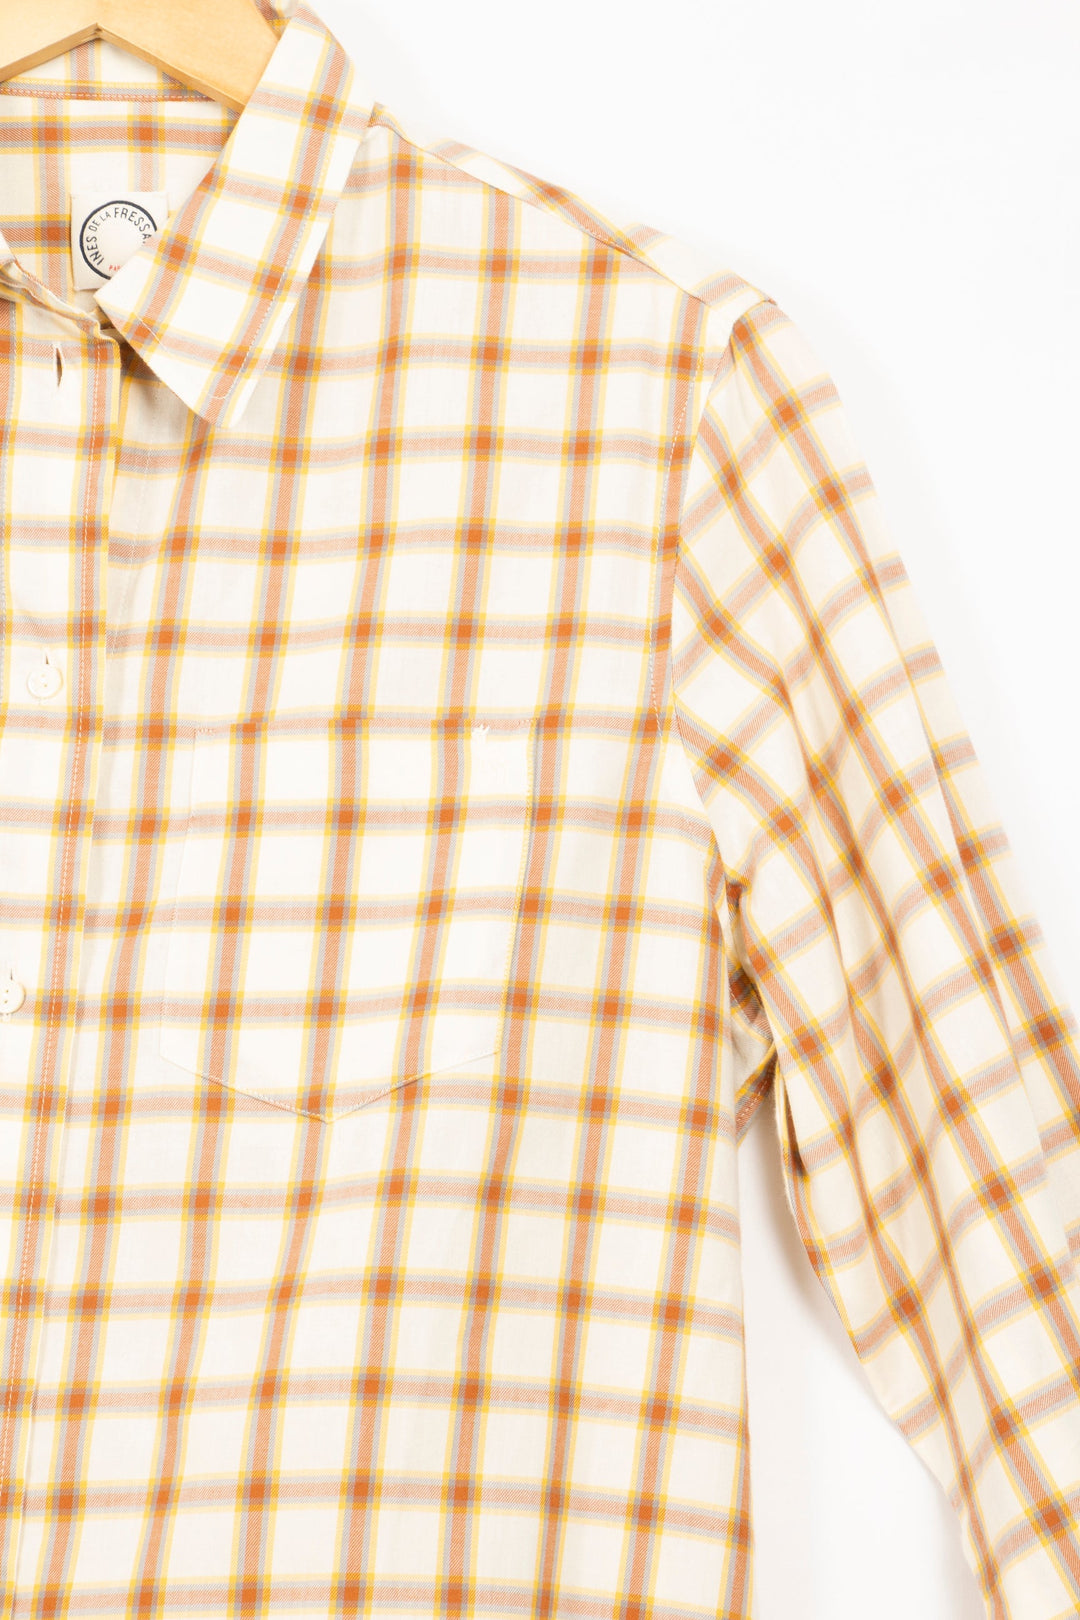 Beige shirt with brown checks - 36